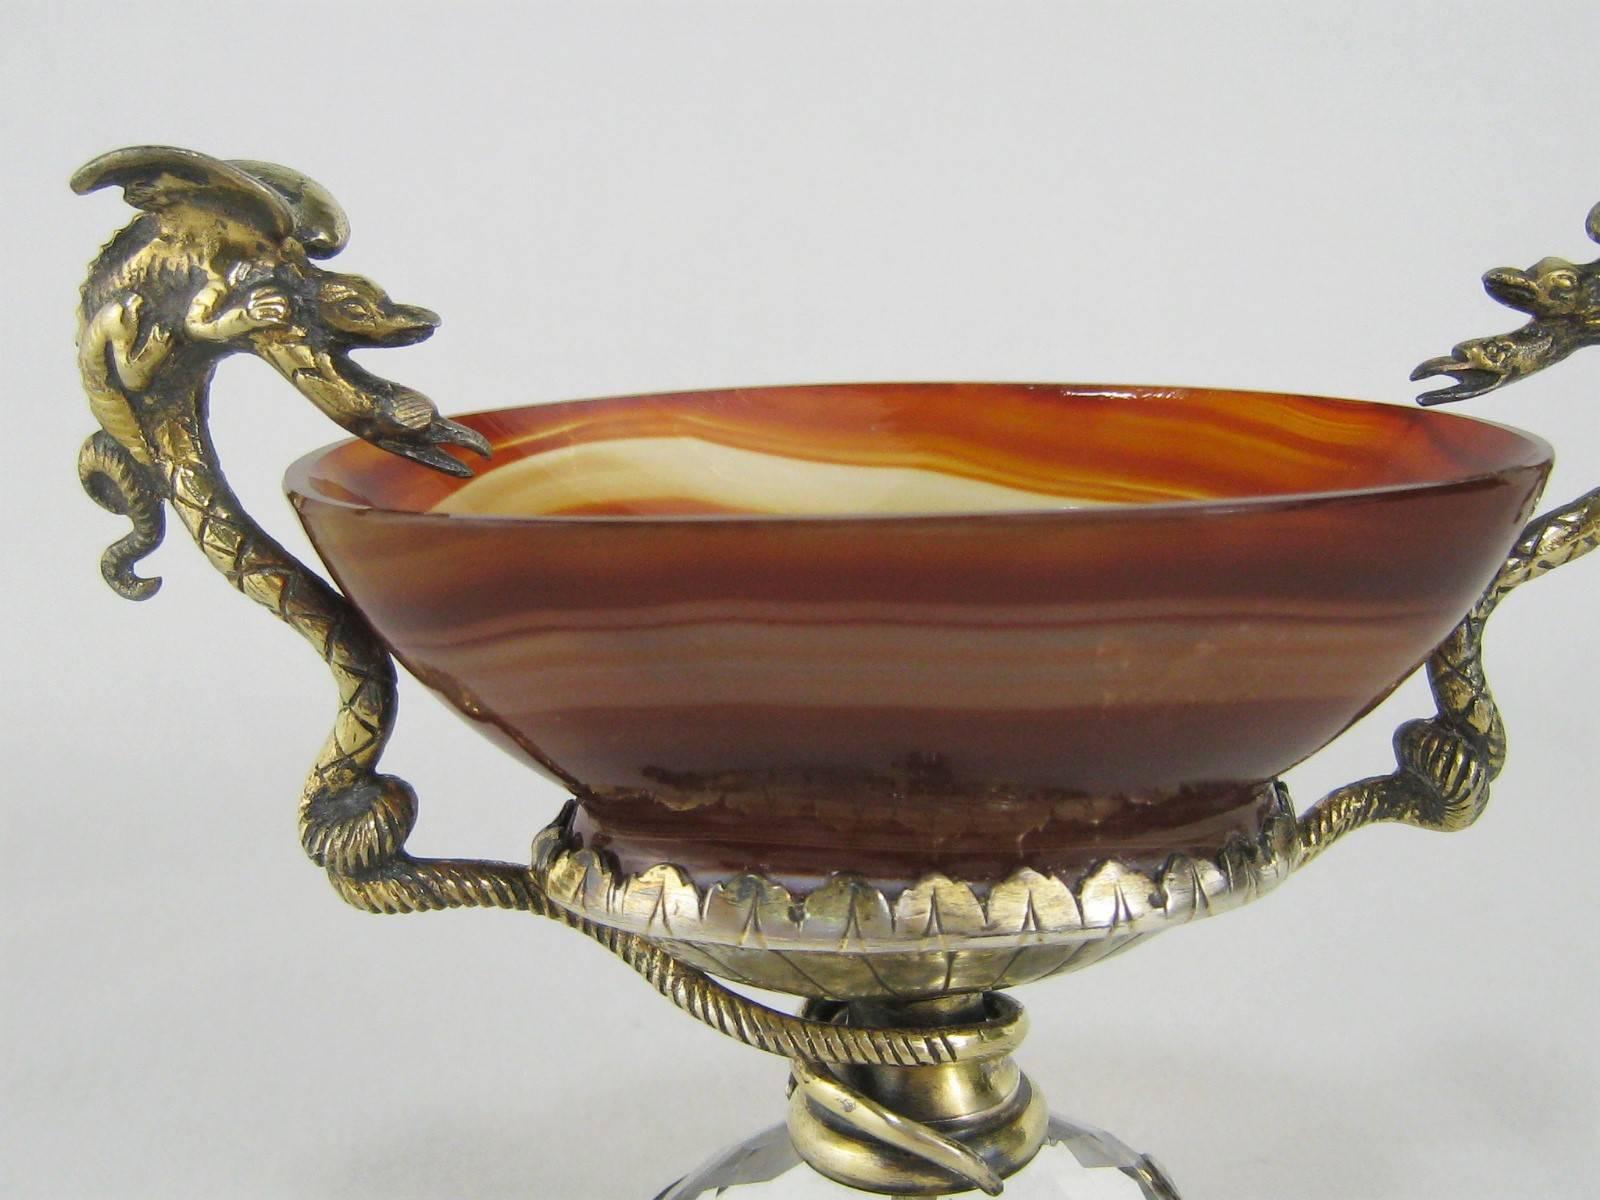 This beautiful and unusual salt dish is carved of red banded agate stone. It sits atop a gilt silver and faceted rock crystal base with four tiny frogs as feet. Turquoise stones are mounted on each side. The bowl is supported by handles cast as